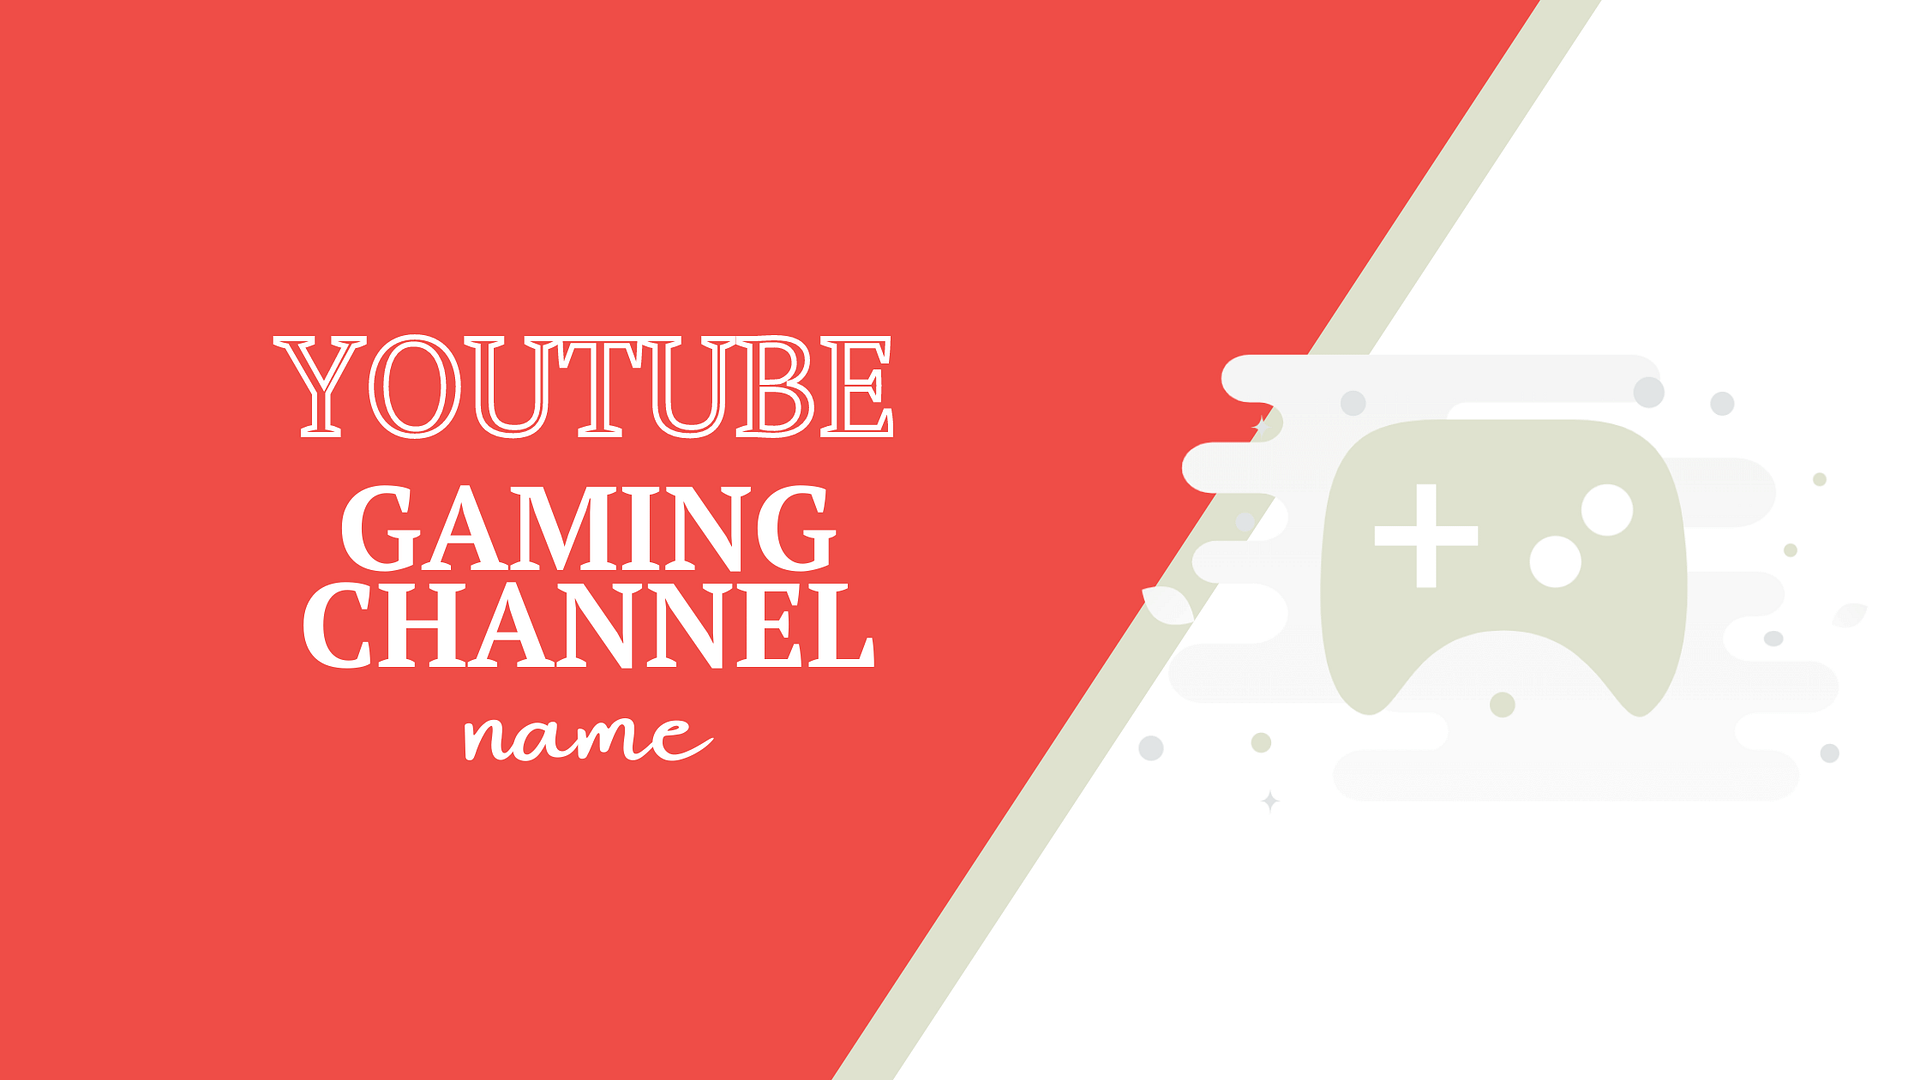 Unique Names For Gaming Channel, Gaming Channel Names